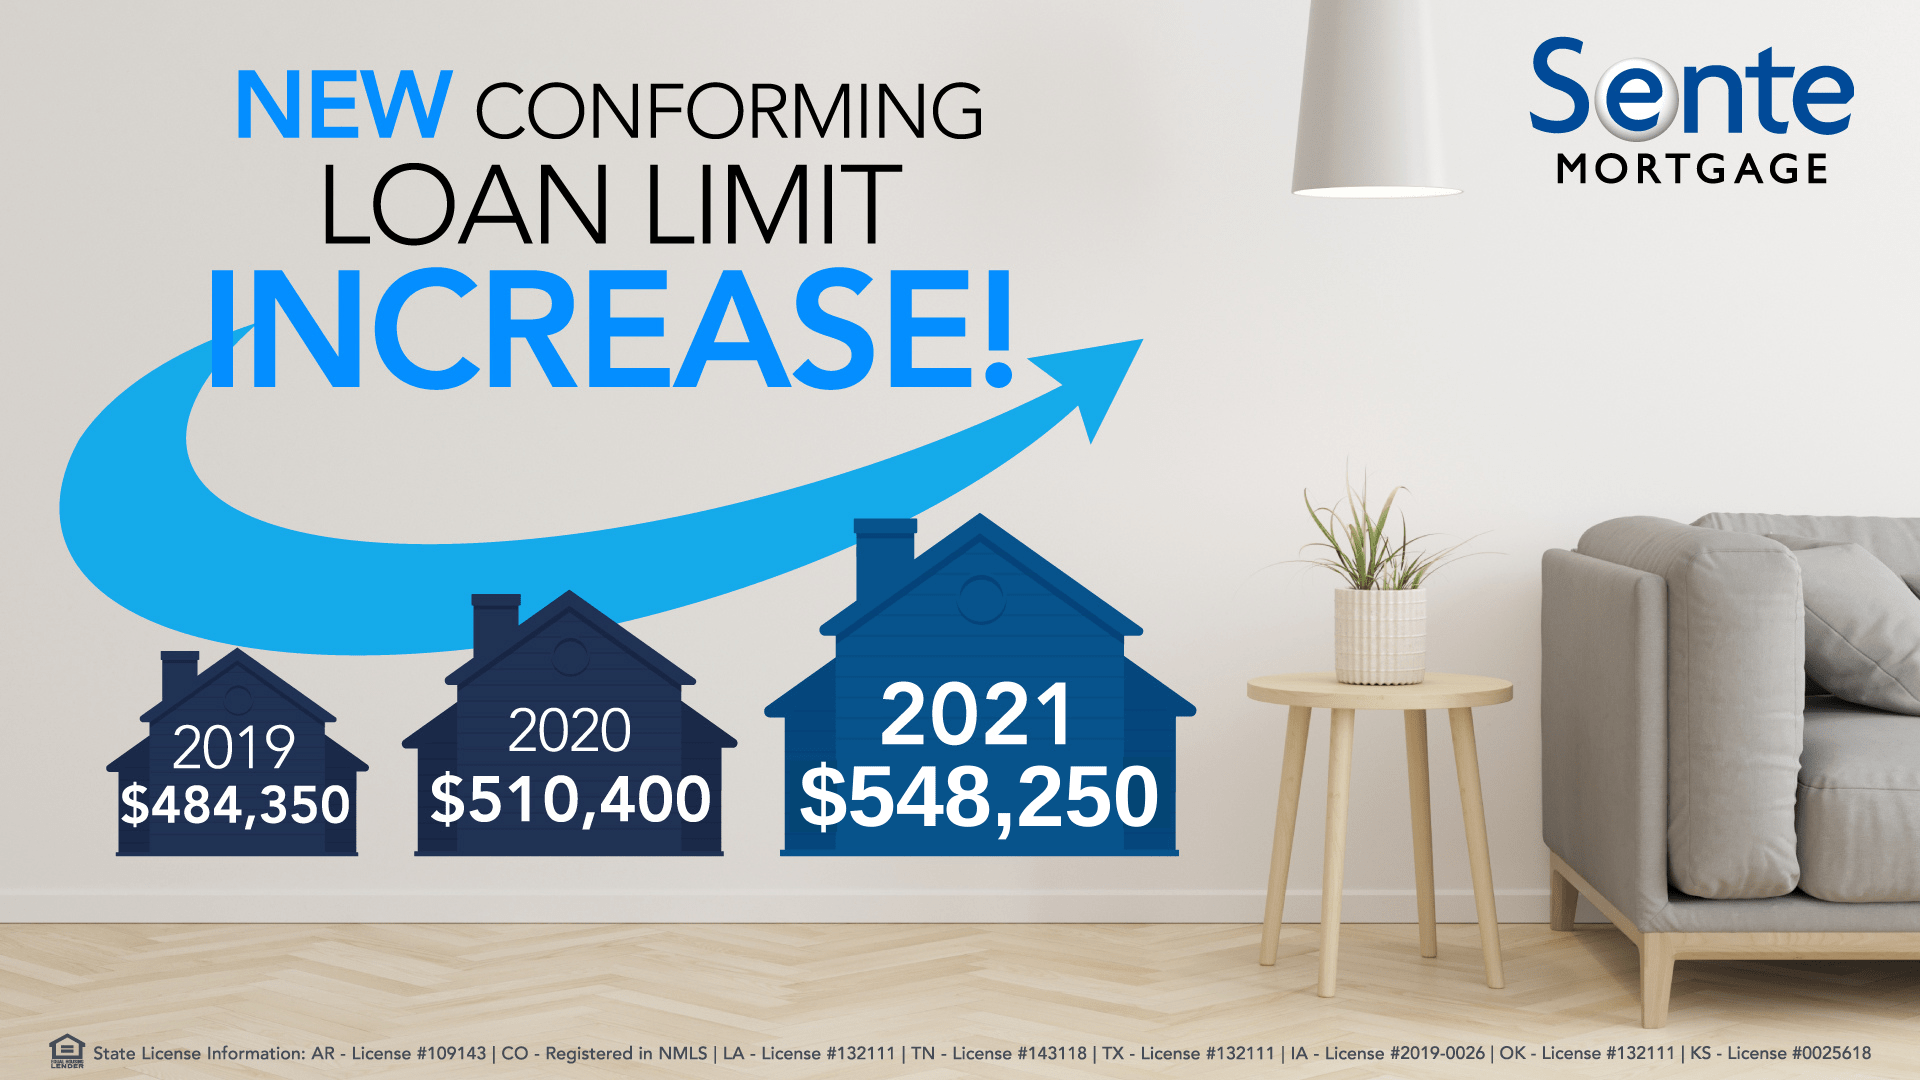 New conforming loan limit increase for 2021